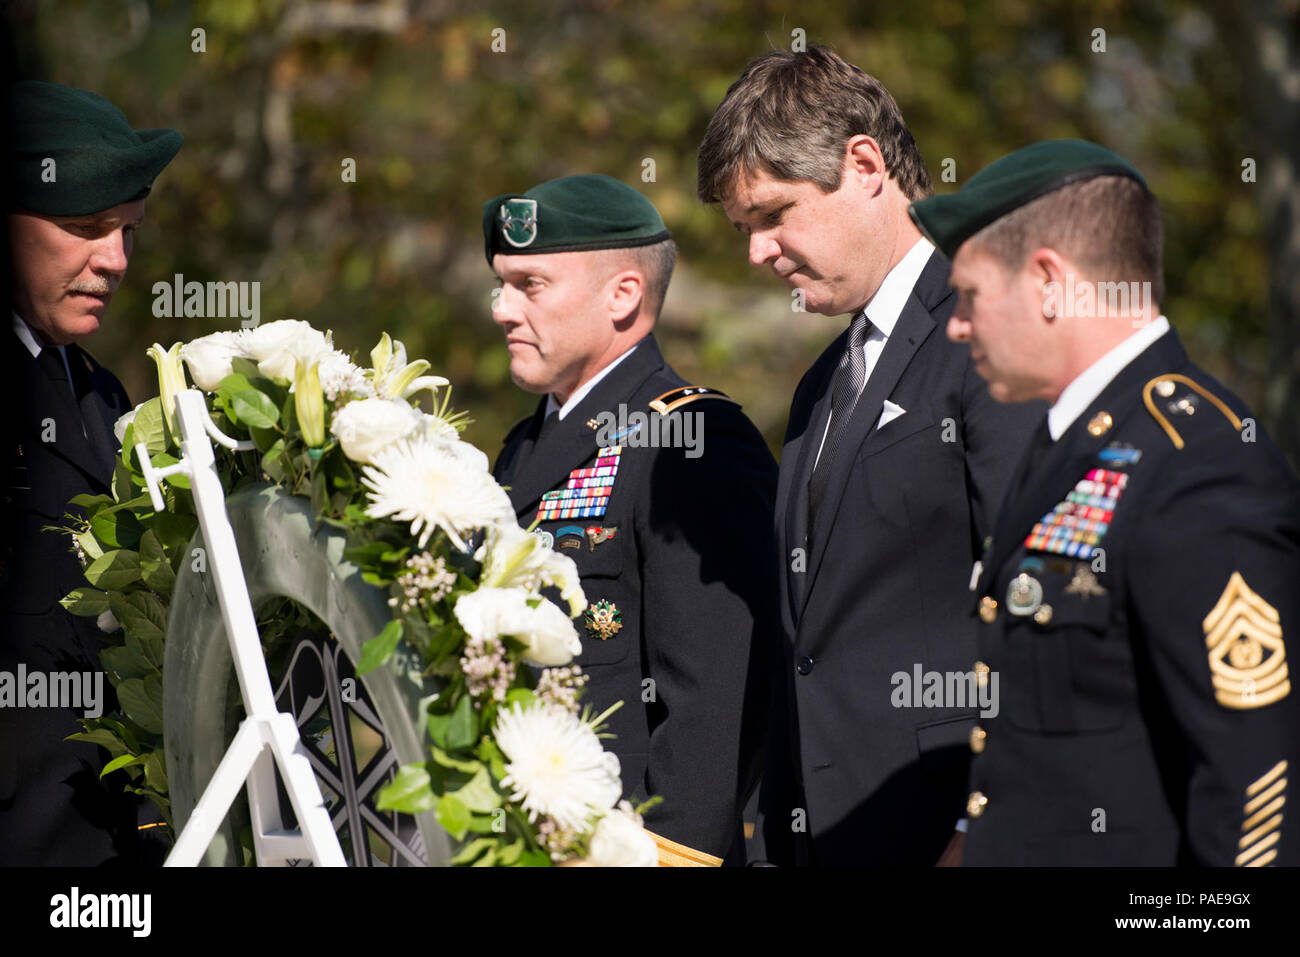 Commanding General of 1st Special Forces Command (Airborne)(Provisional) Maj. Gen. James E. Kraft Jr., President John F. Kennedy’s nephew Dr. William Kennedy Smith and 1st Special Forces Command (Airborne)(Provisional) Command Sgt. Maj. Brian C. Rarey lay a wreath at the gravesite of President John F. Kennedy in Arlington National Cemetery, Oct. 20, 2015, in Arlington, Va. Kennedy contributed greatly to the Special Forces, including authorizing the “Green Beret” as the official headgear for all U.S. Army Special Forces. Stock Photo